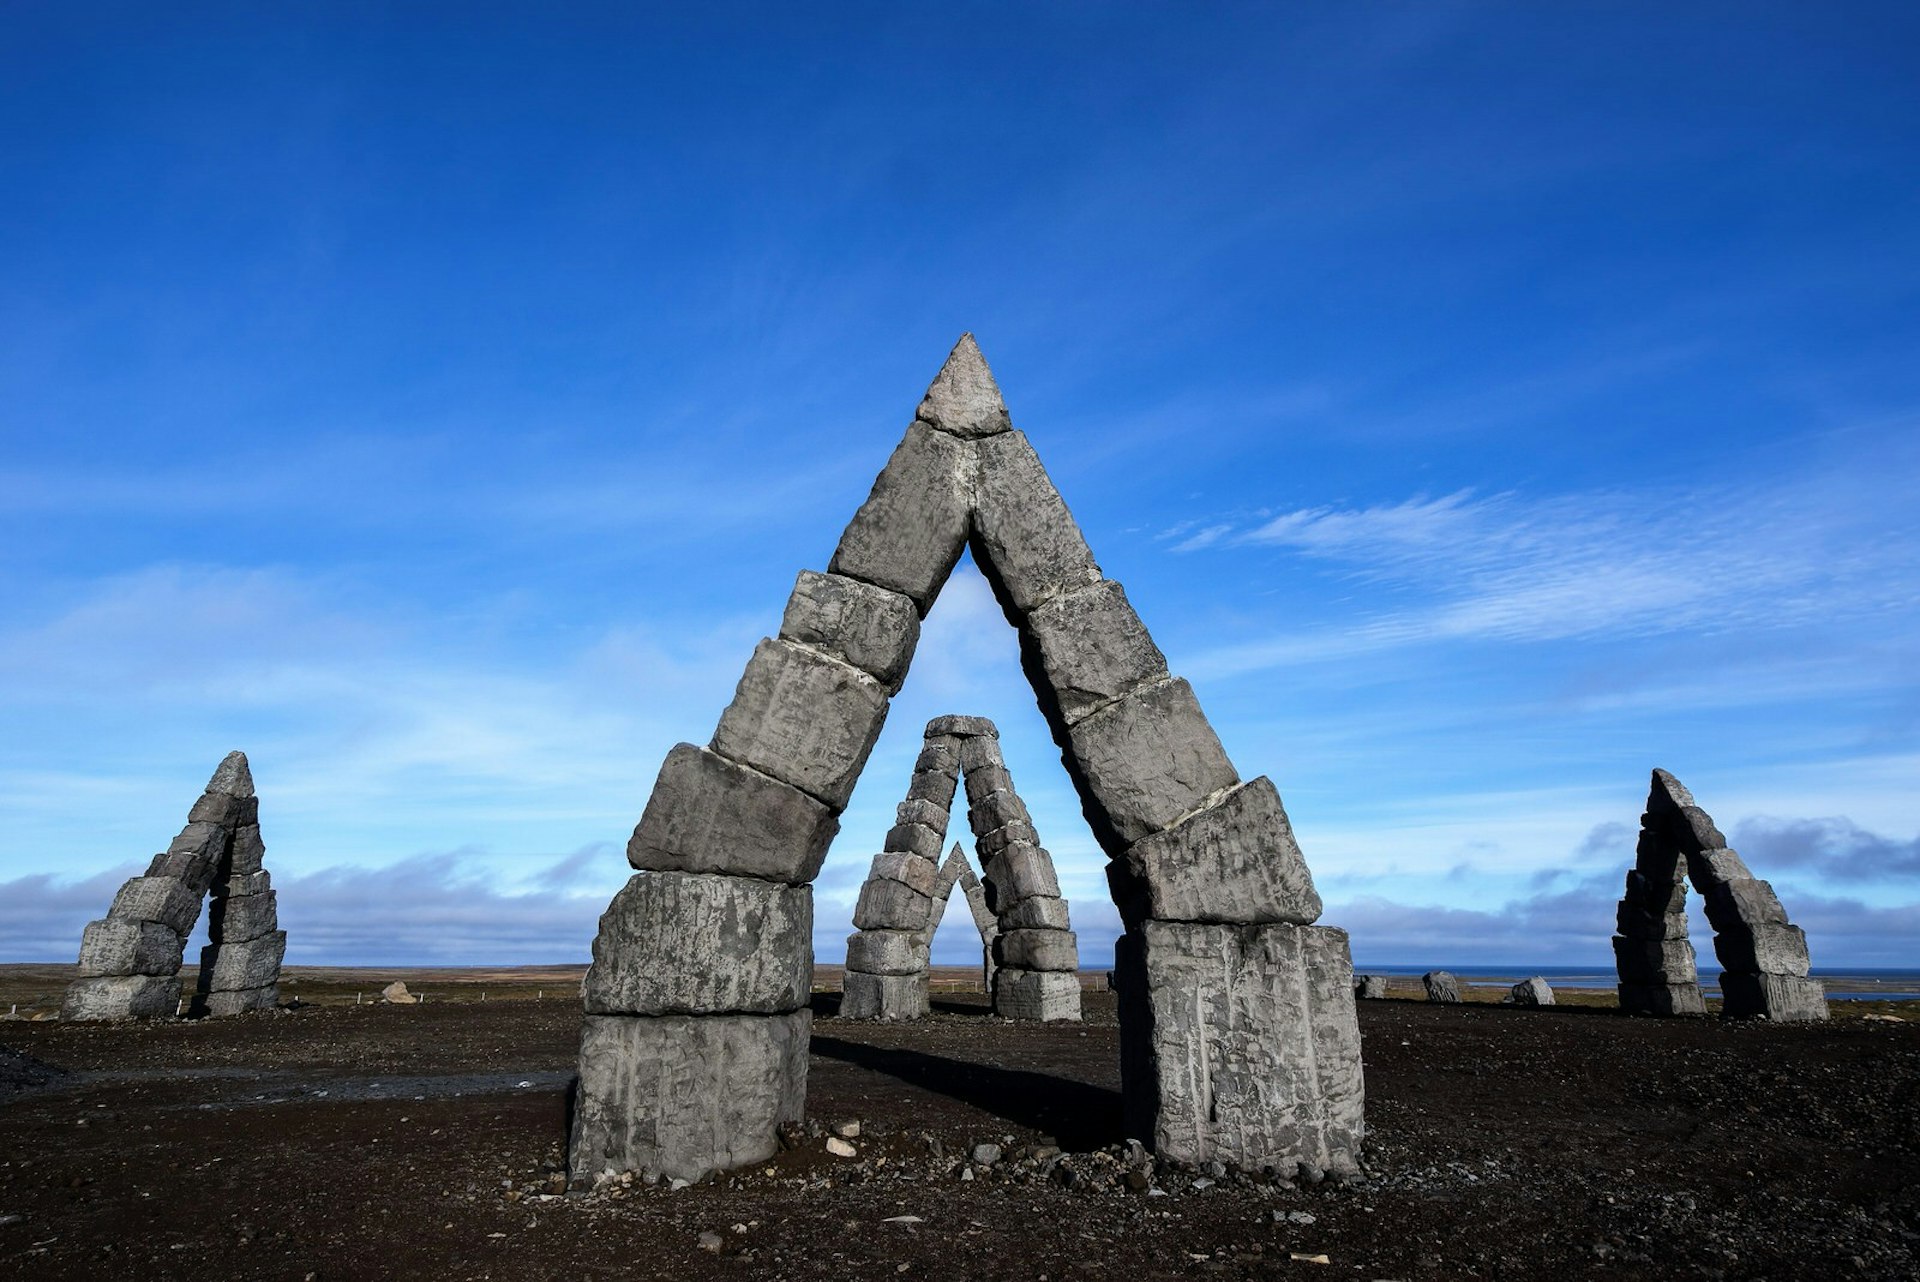 Stone triangles form the Arctic Henge sculpture